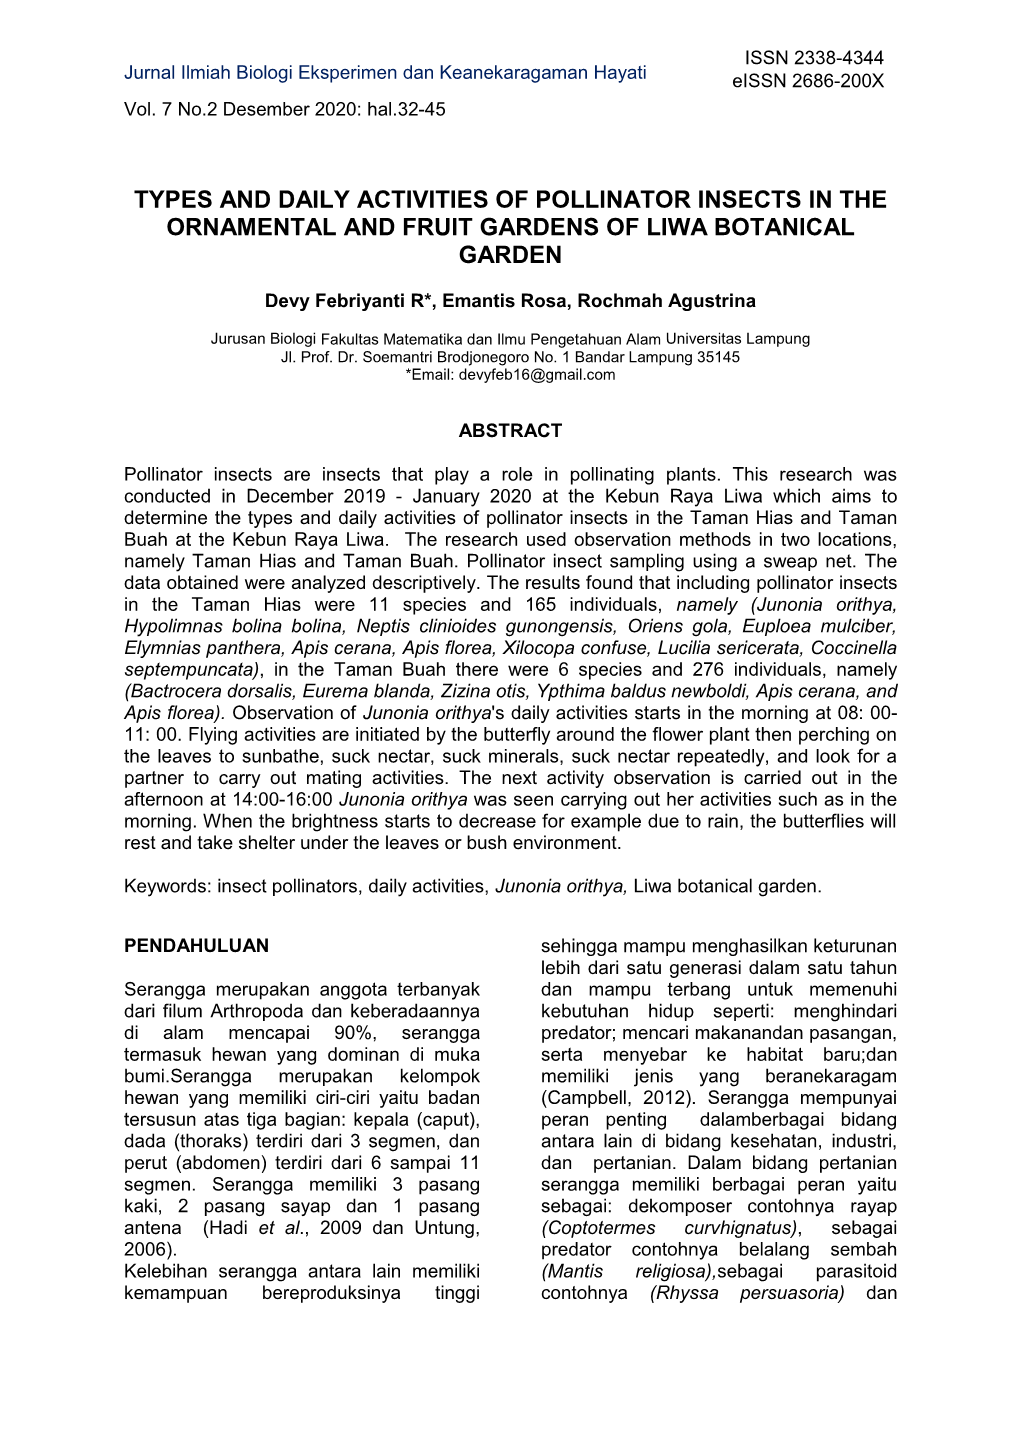 Types and Daily Activities of Pollinator Insects in the Ornamental and Fruit Gardens of Liwa Botanical Garden